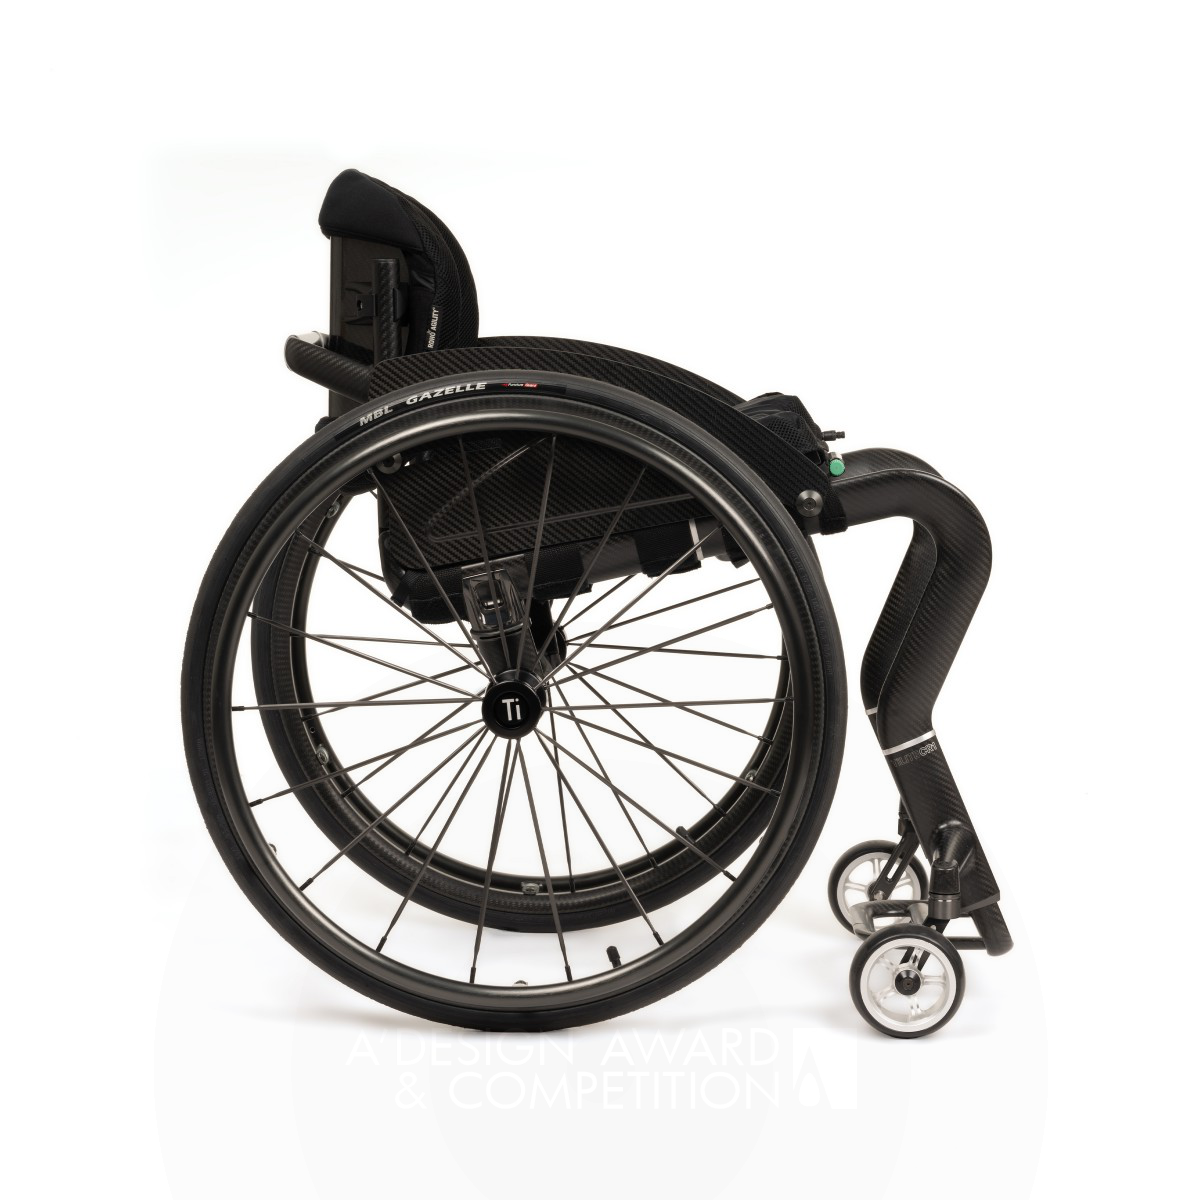 CR1 Wheelchair by Doug Garven Golden Product Engineering and Technical Design Award Winner 2024 